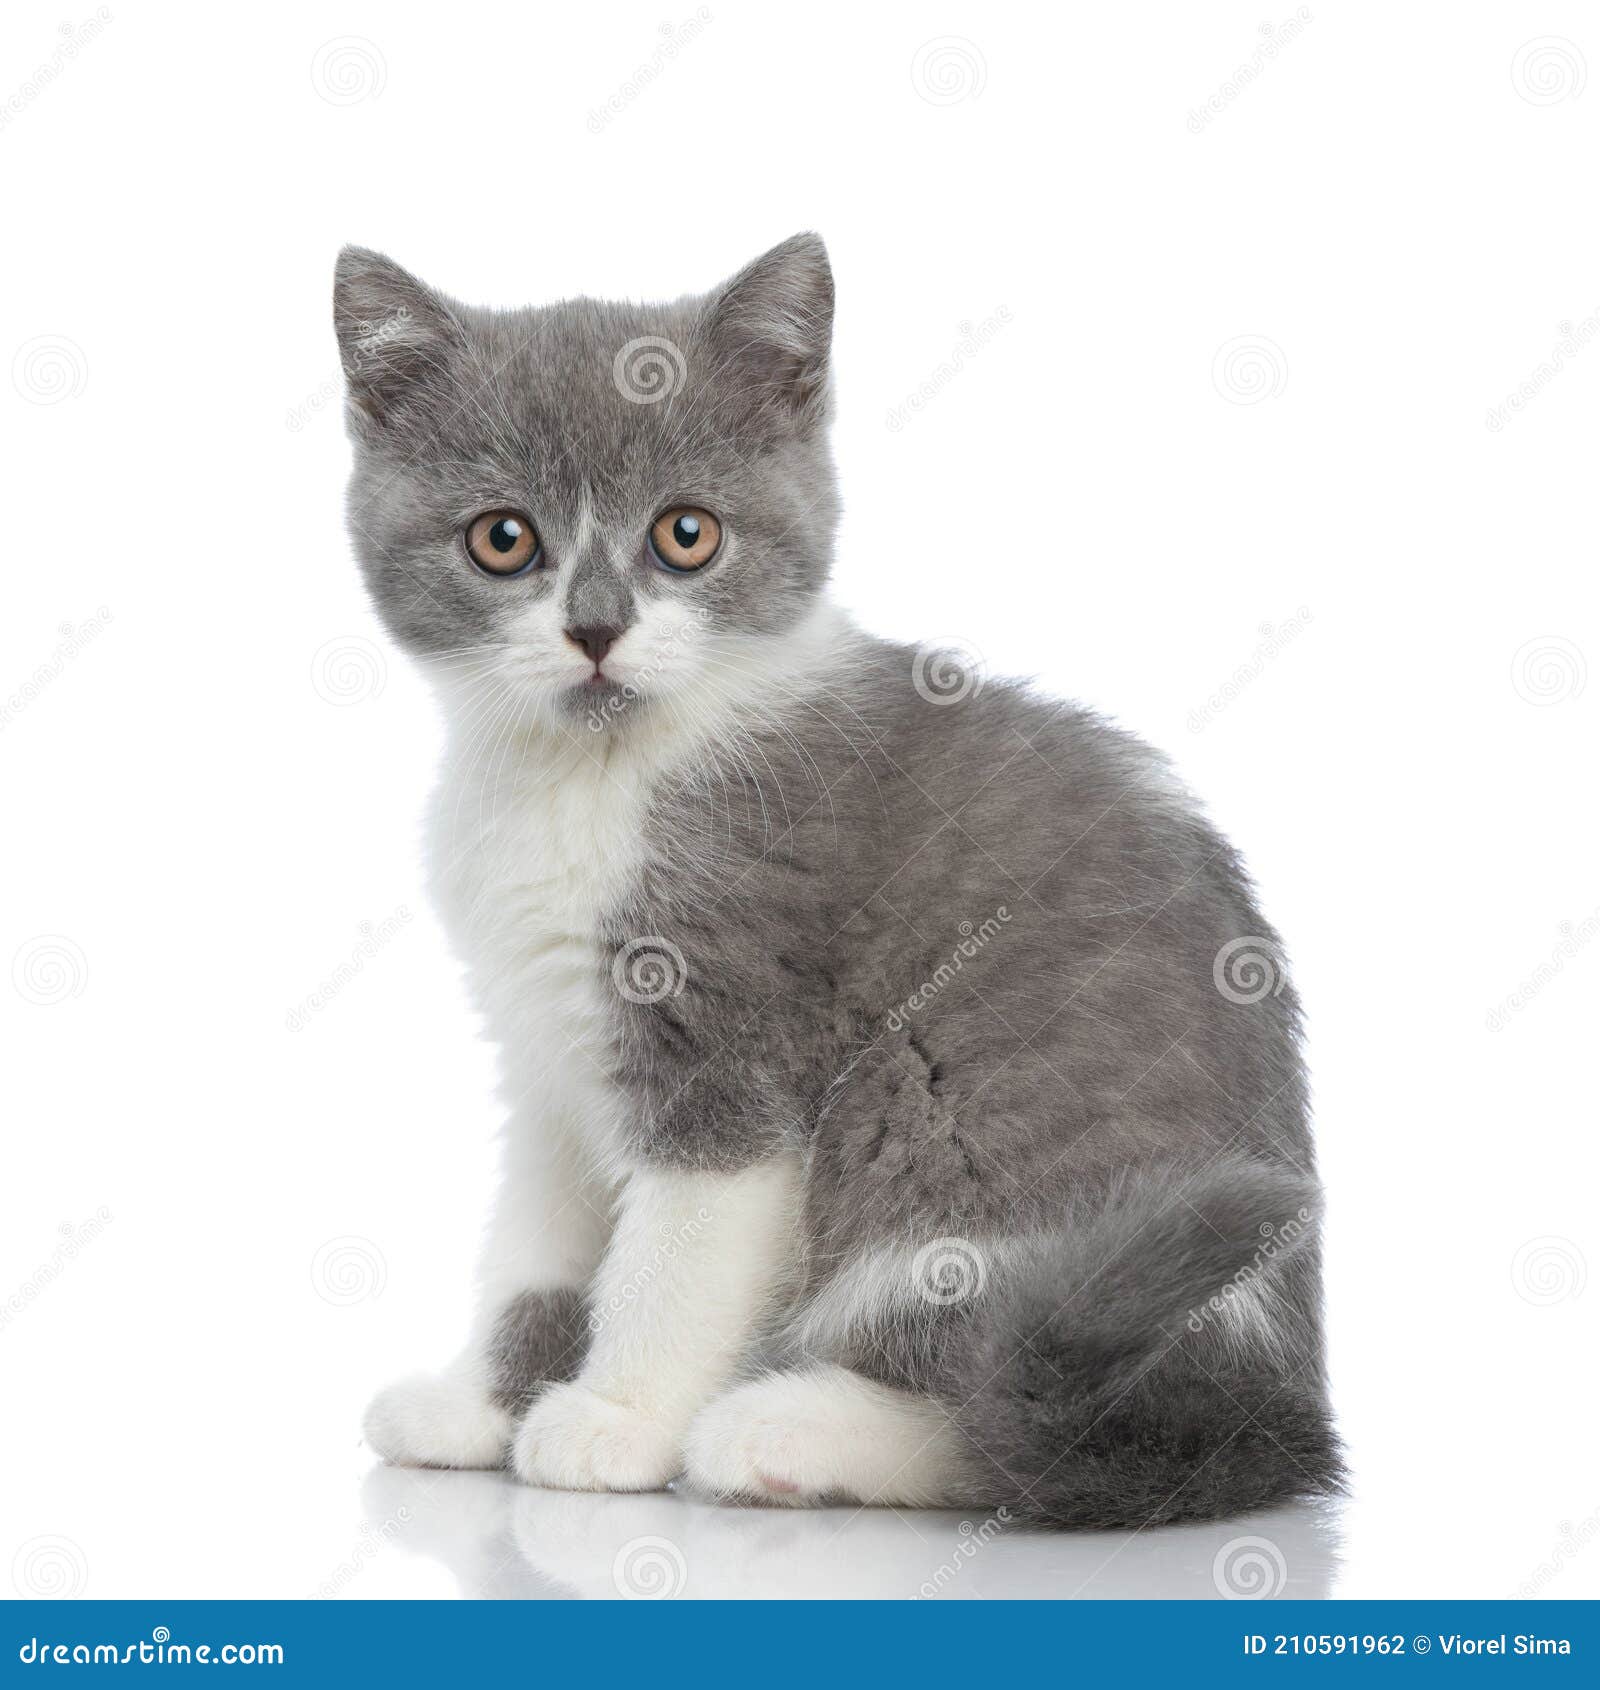 22 254 Beautiful British Shorthair Photos Free Royalty Free Stock Photos From Dreamstime